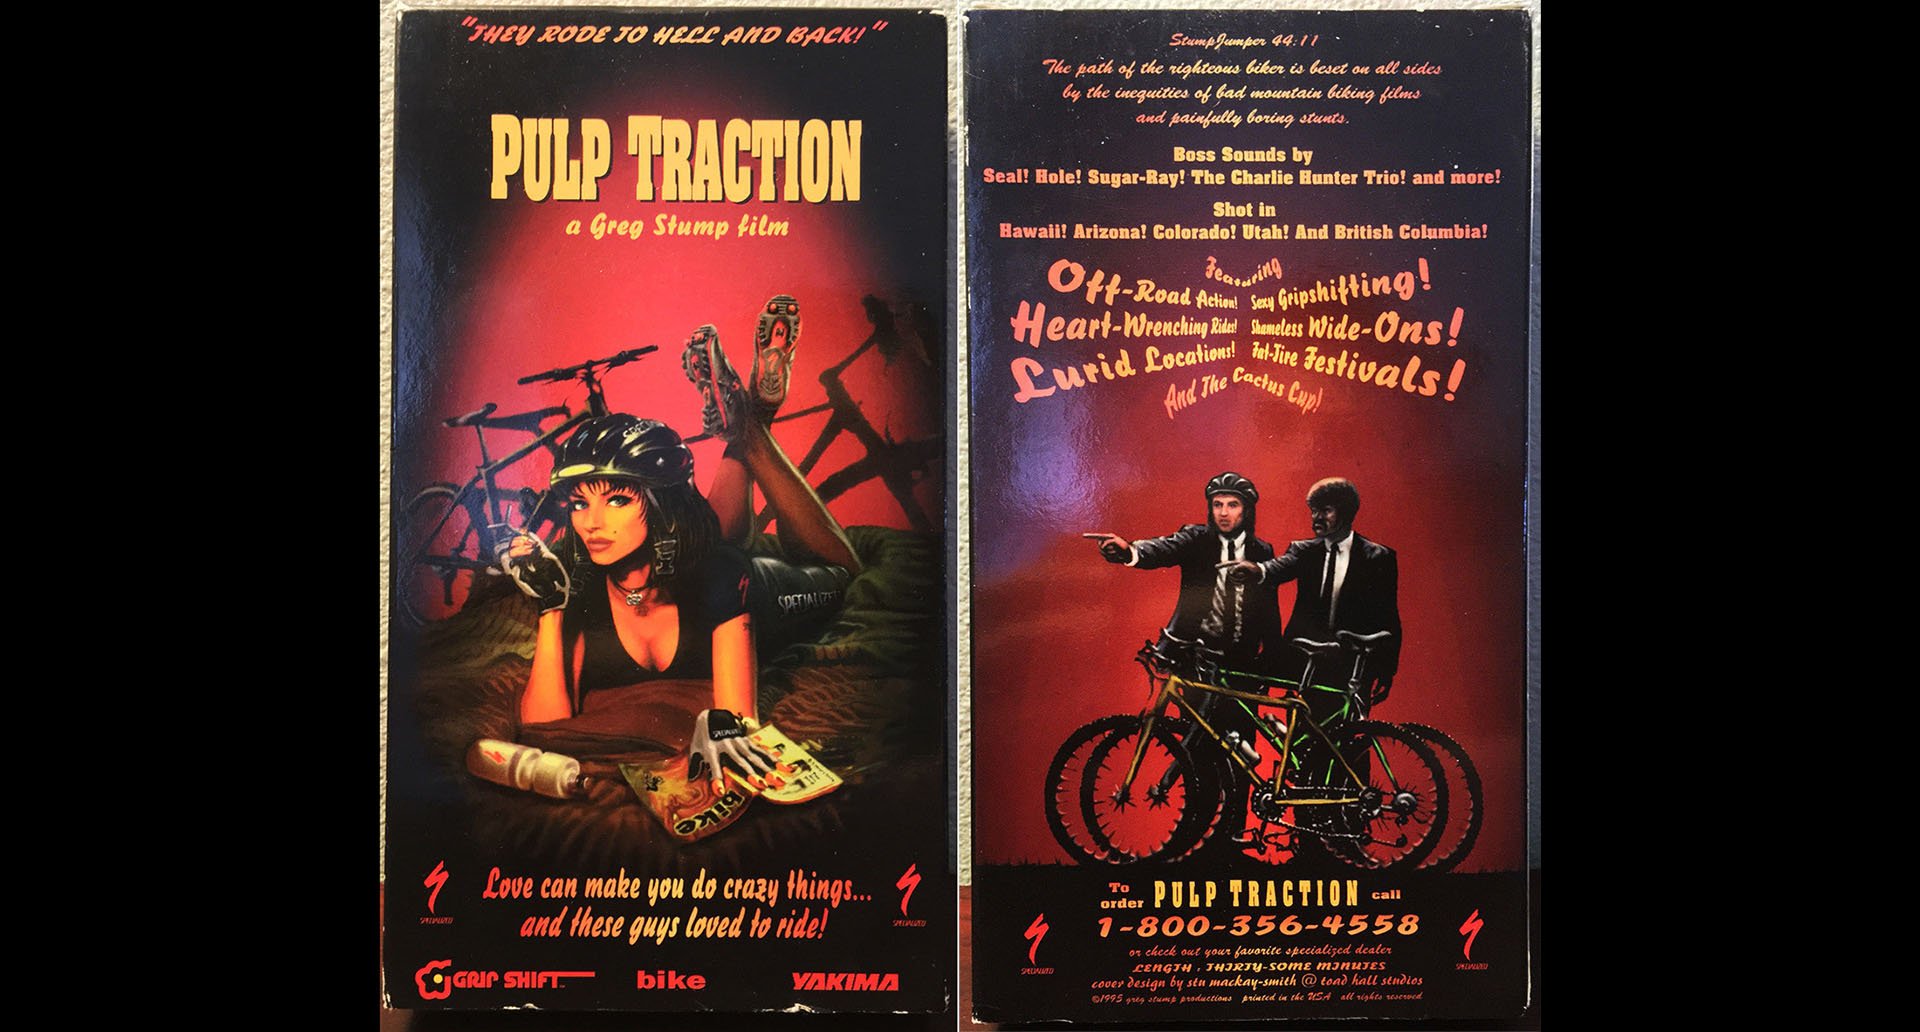 Pulp Traction